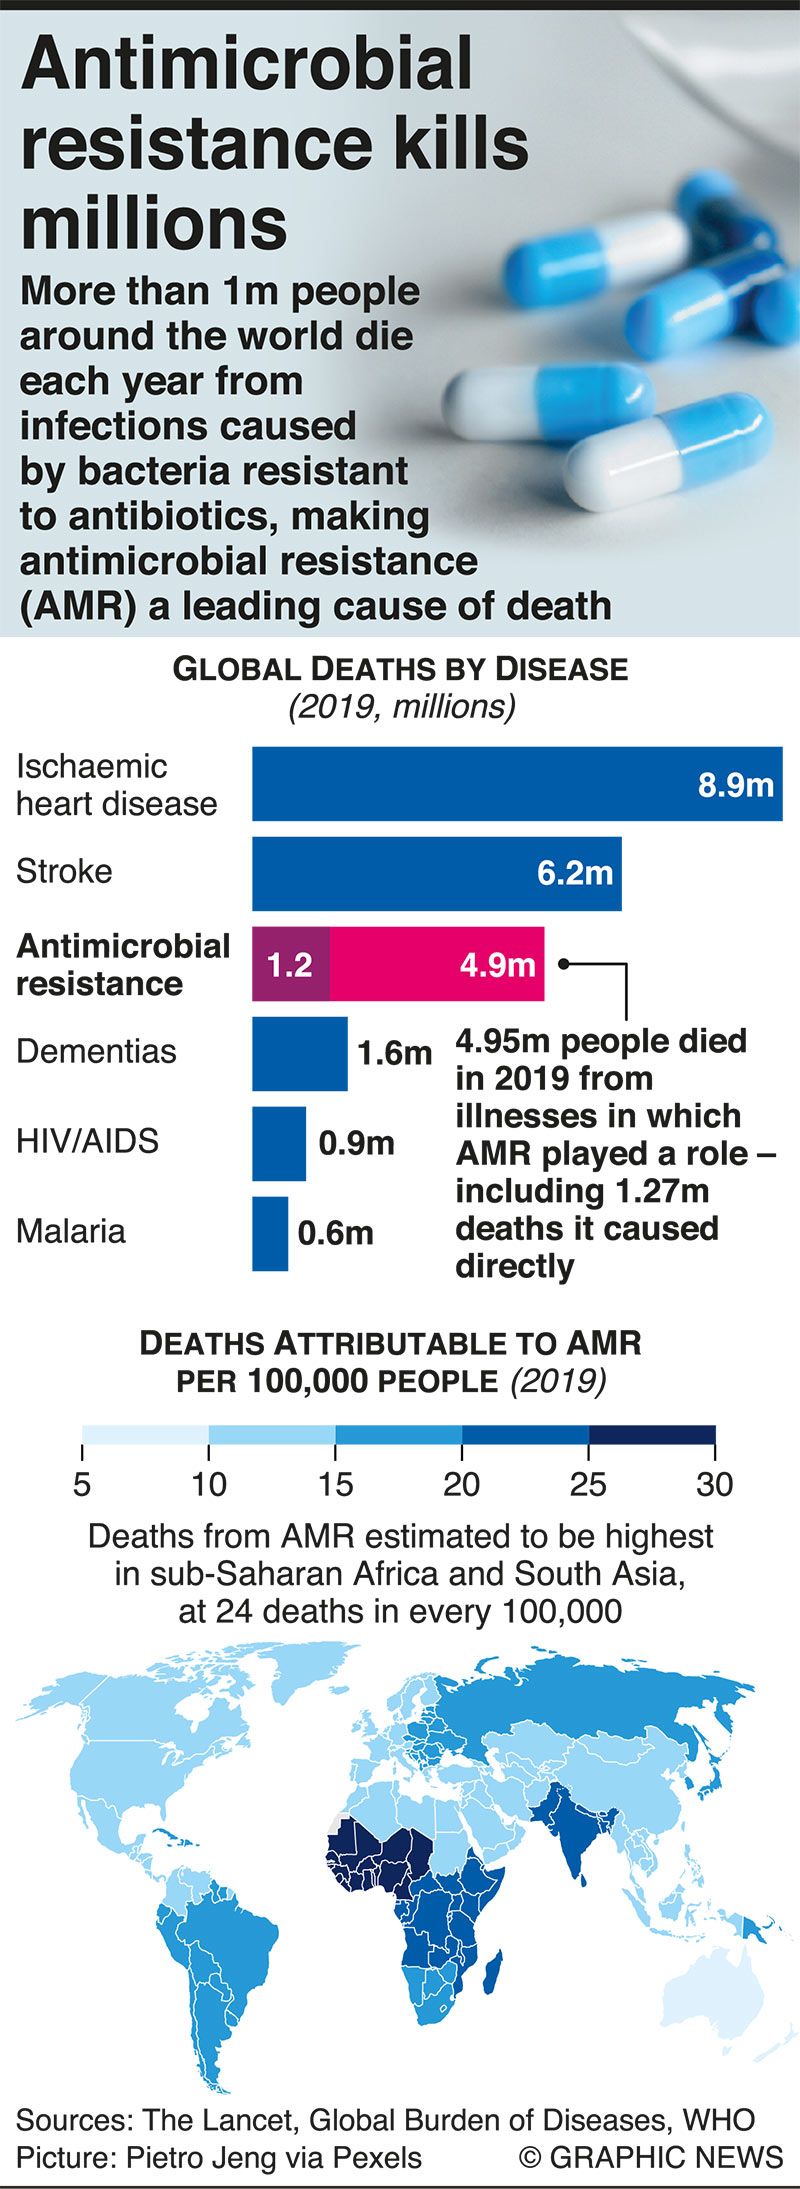 Antimicrobial resistance now a leading cause of death